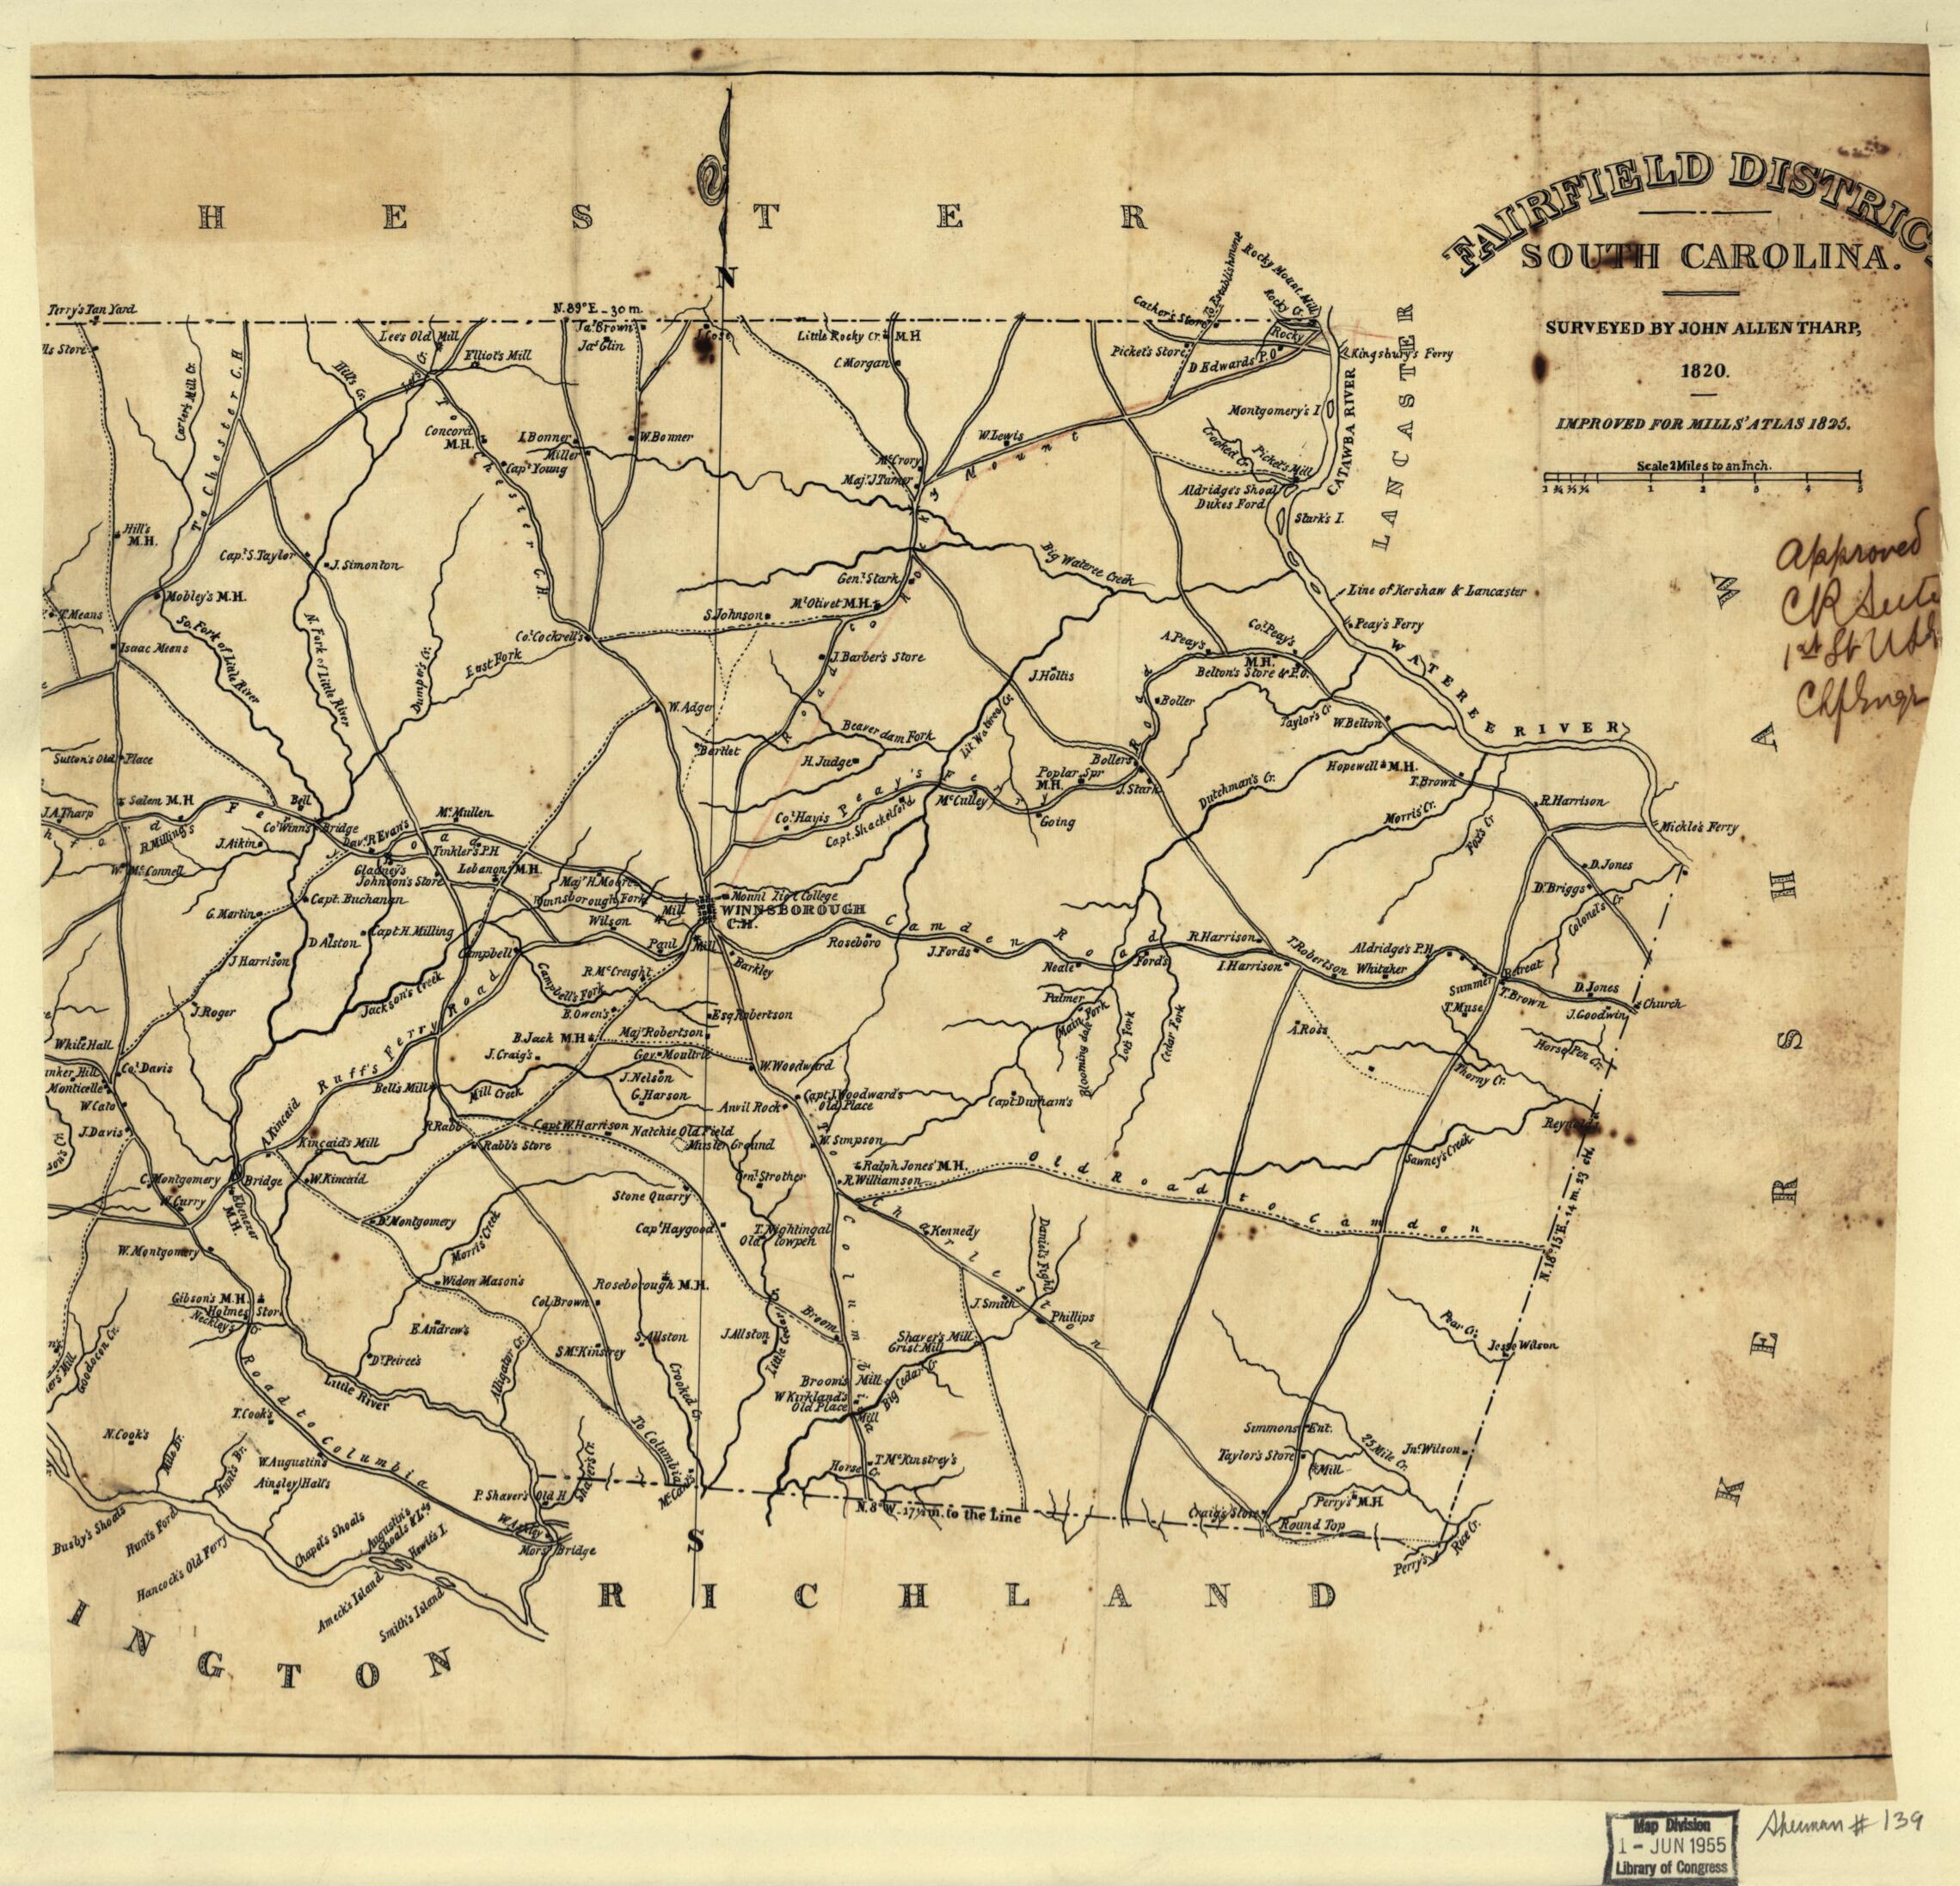 This old map of Fairfield Districtt, South Carolina from 1825 was created by Robert Mills in 1825